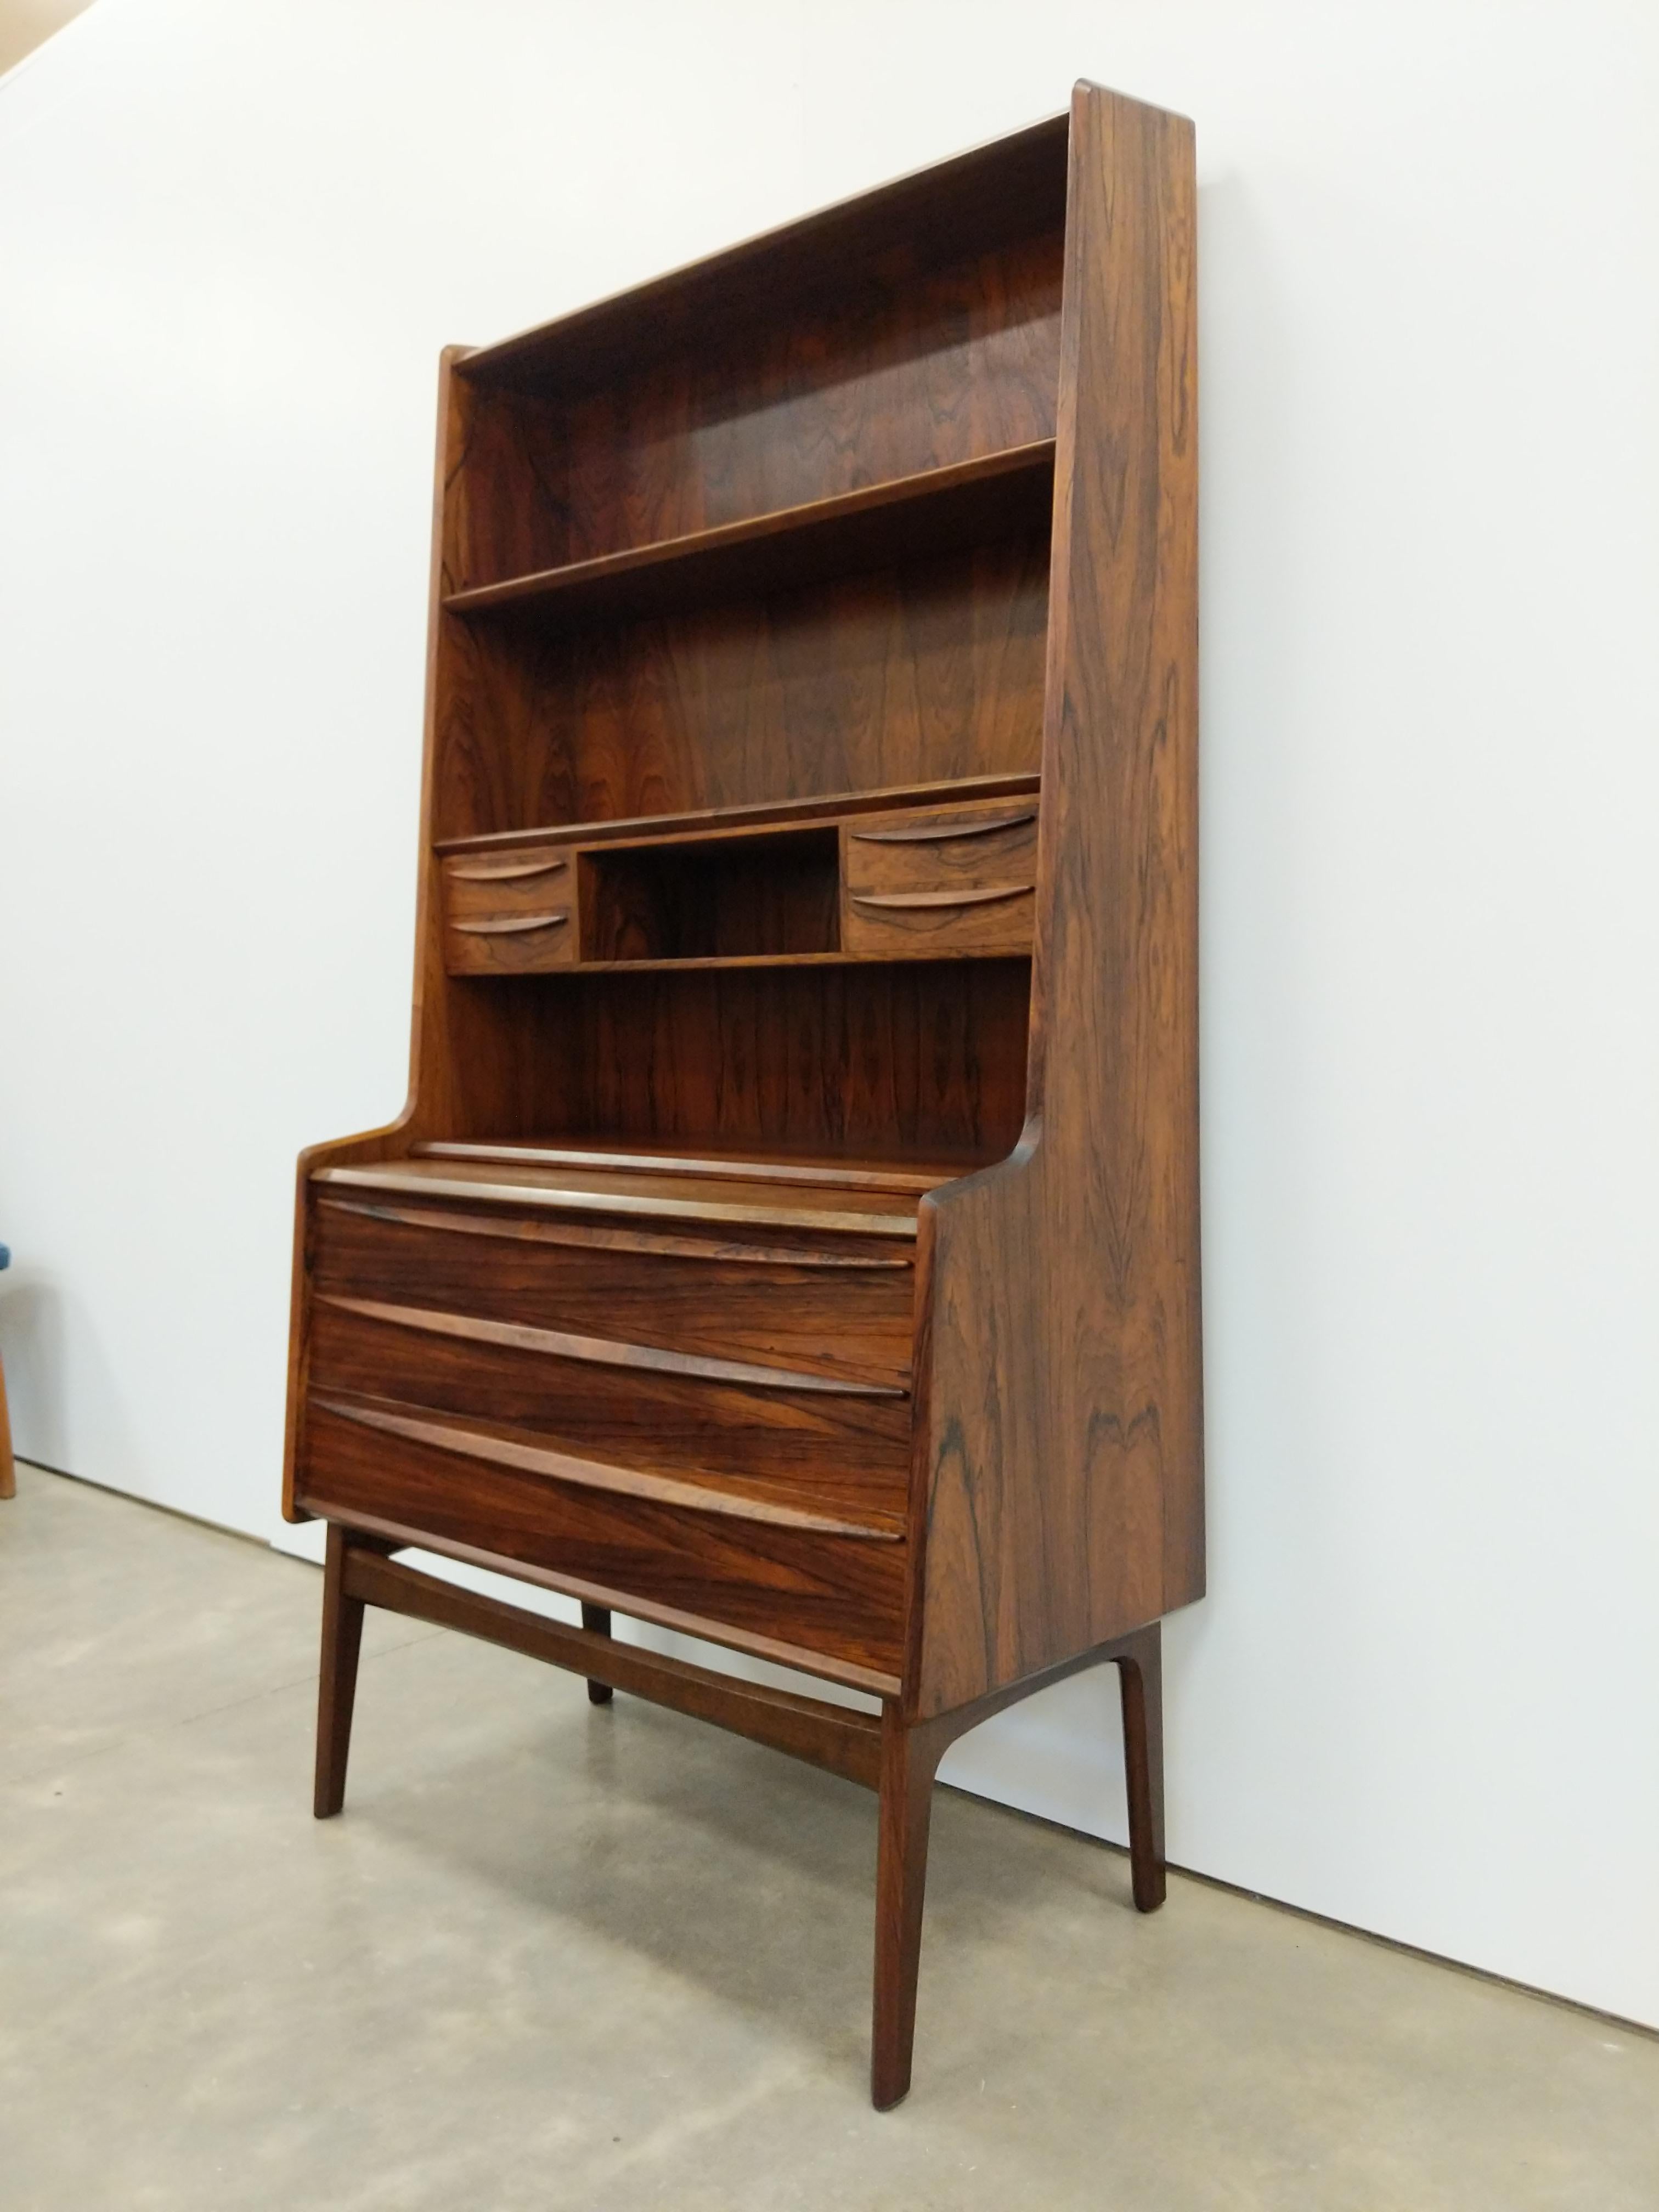 Authentic vintage mid century Danish / Scandinavian Modern rosewood secretary desk / bookshelf / dresser / chest of drawers.

This piece is in excellent condition with few signs of age-related wear (see photos).

If you would like any additional